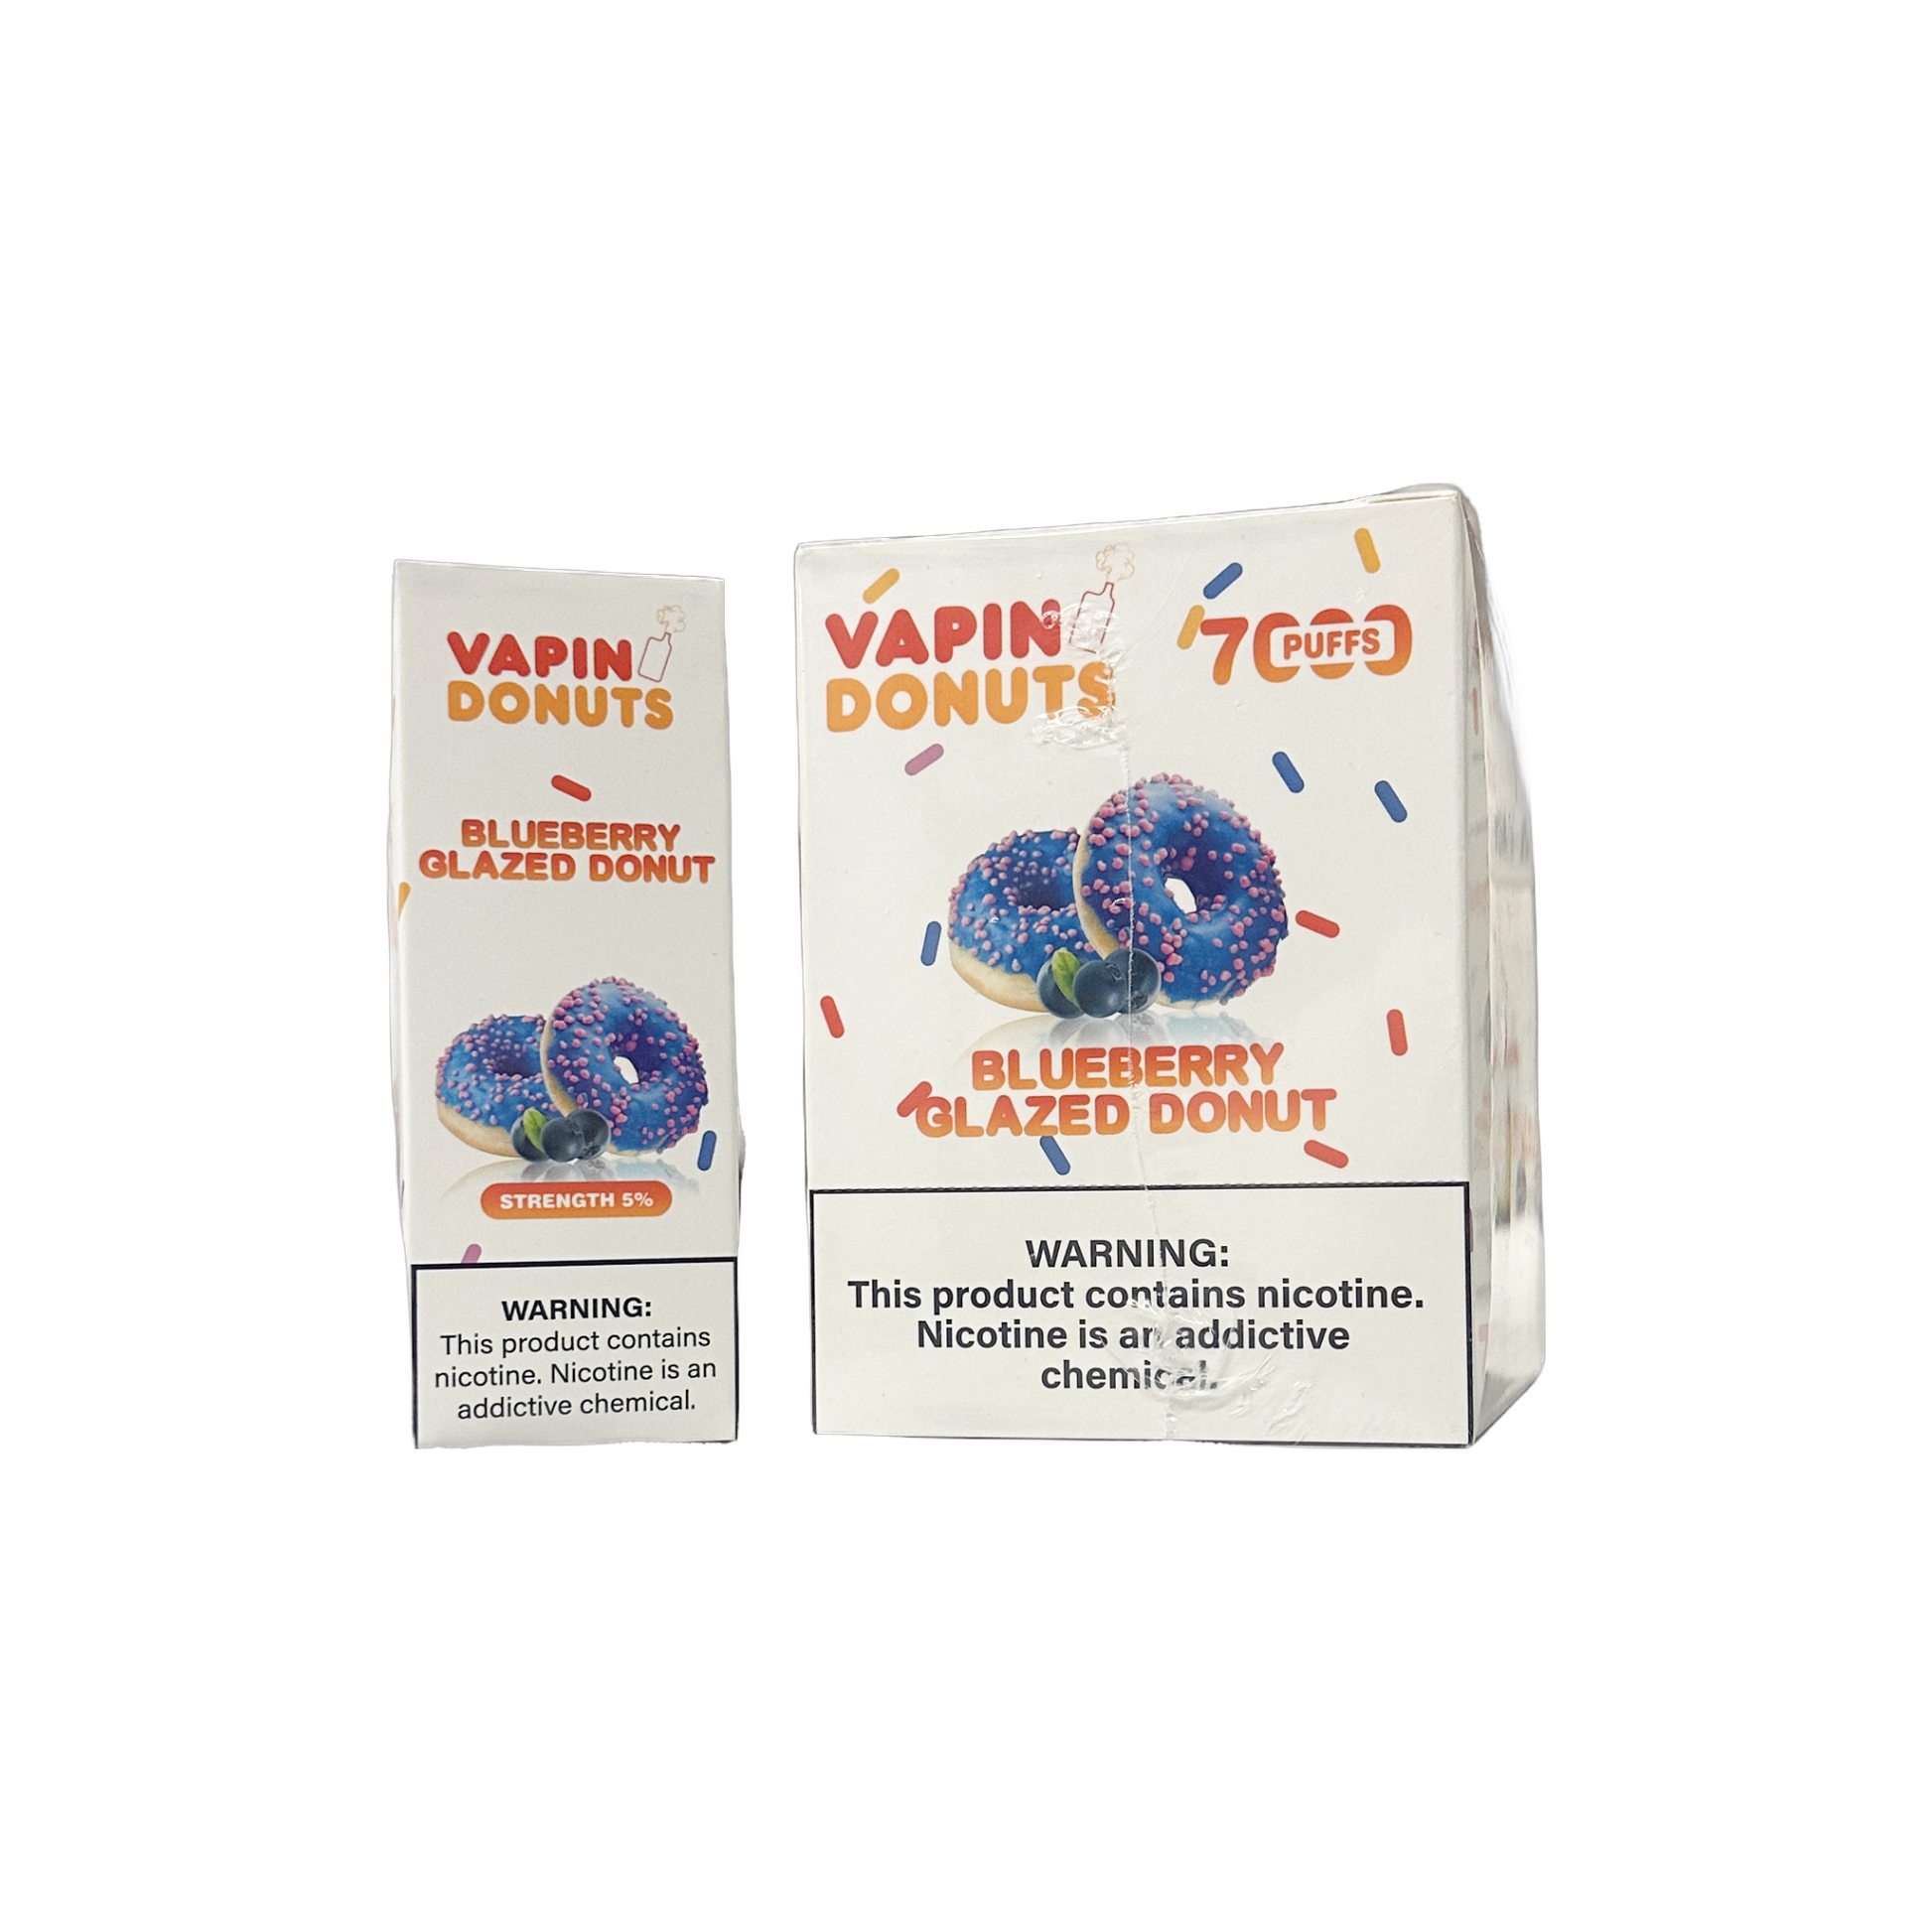 Vapin' Donuts 7000 Puffs Blueberry Glazed Donuts